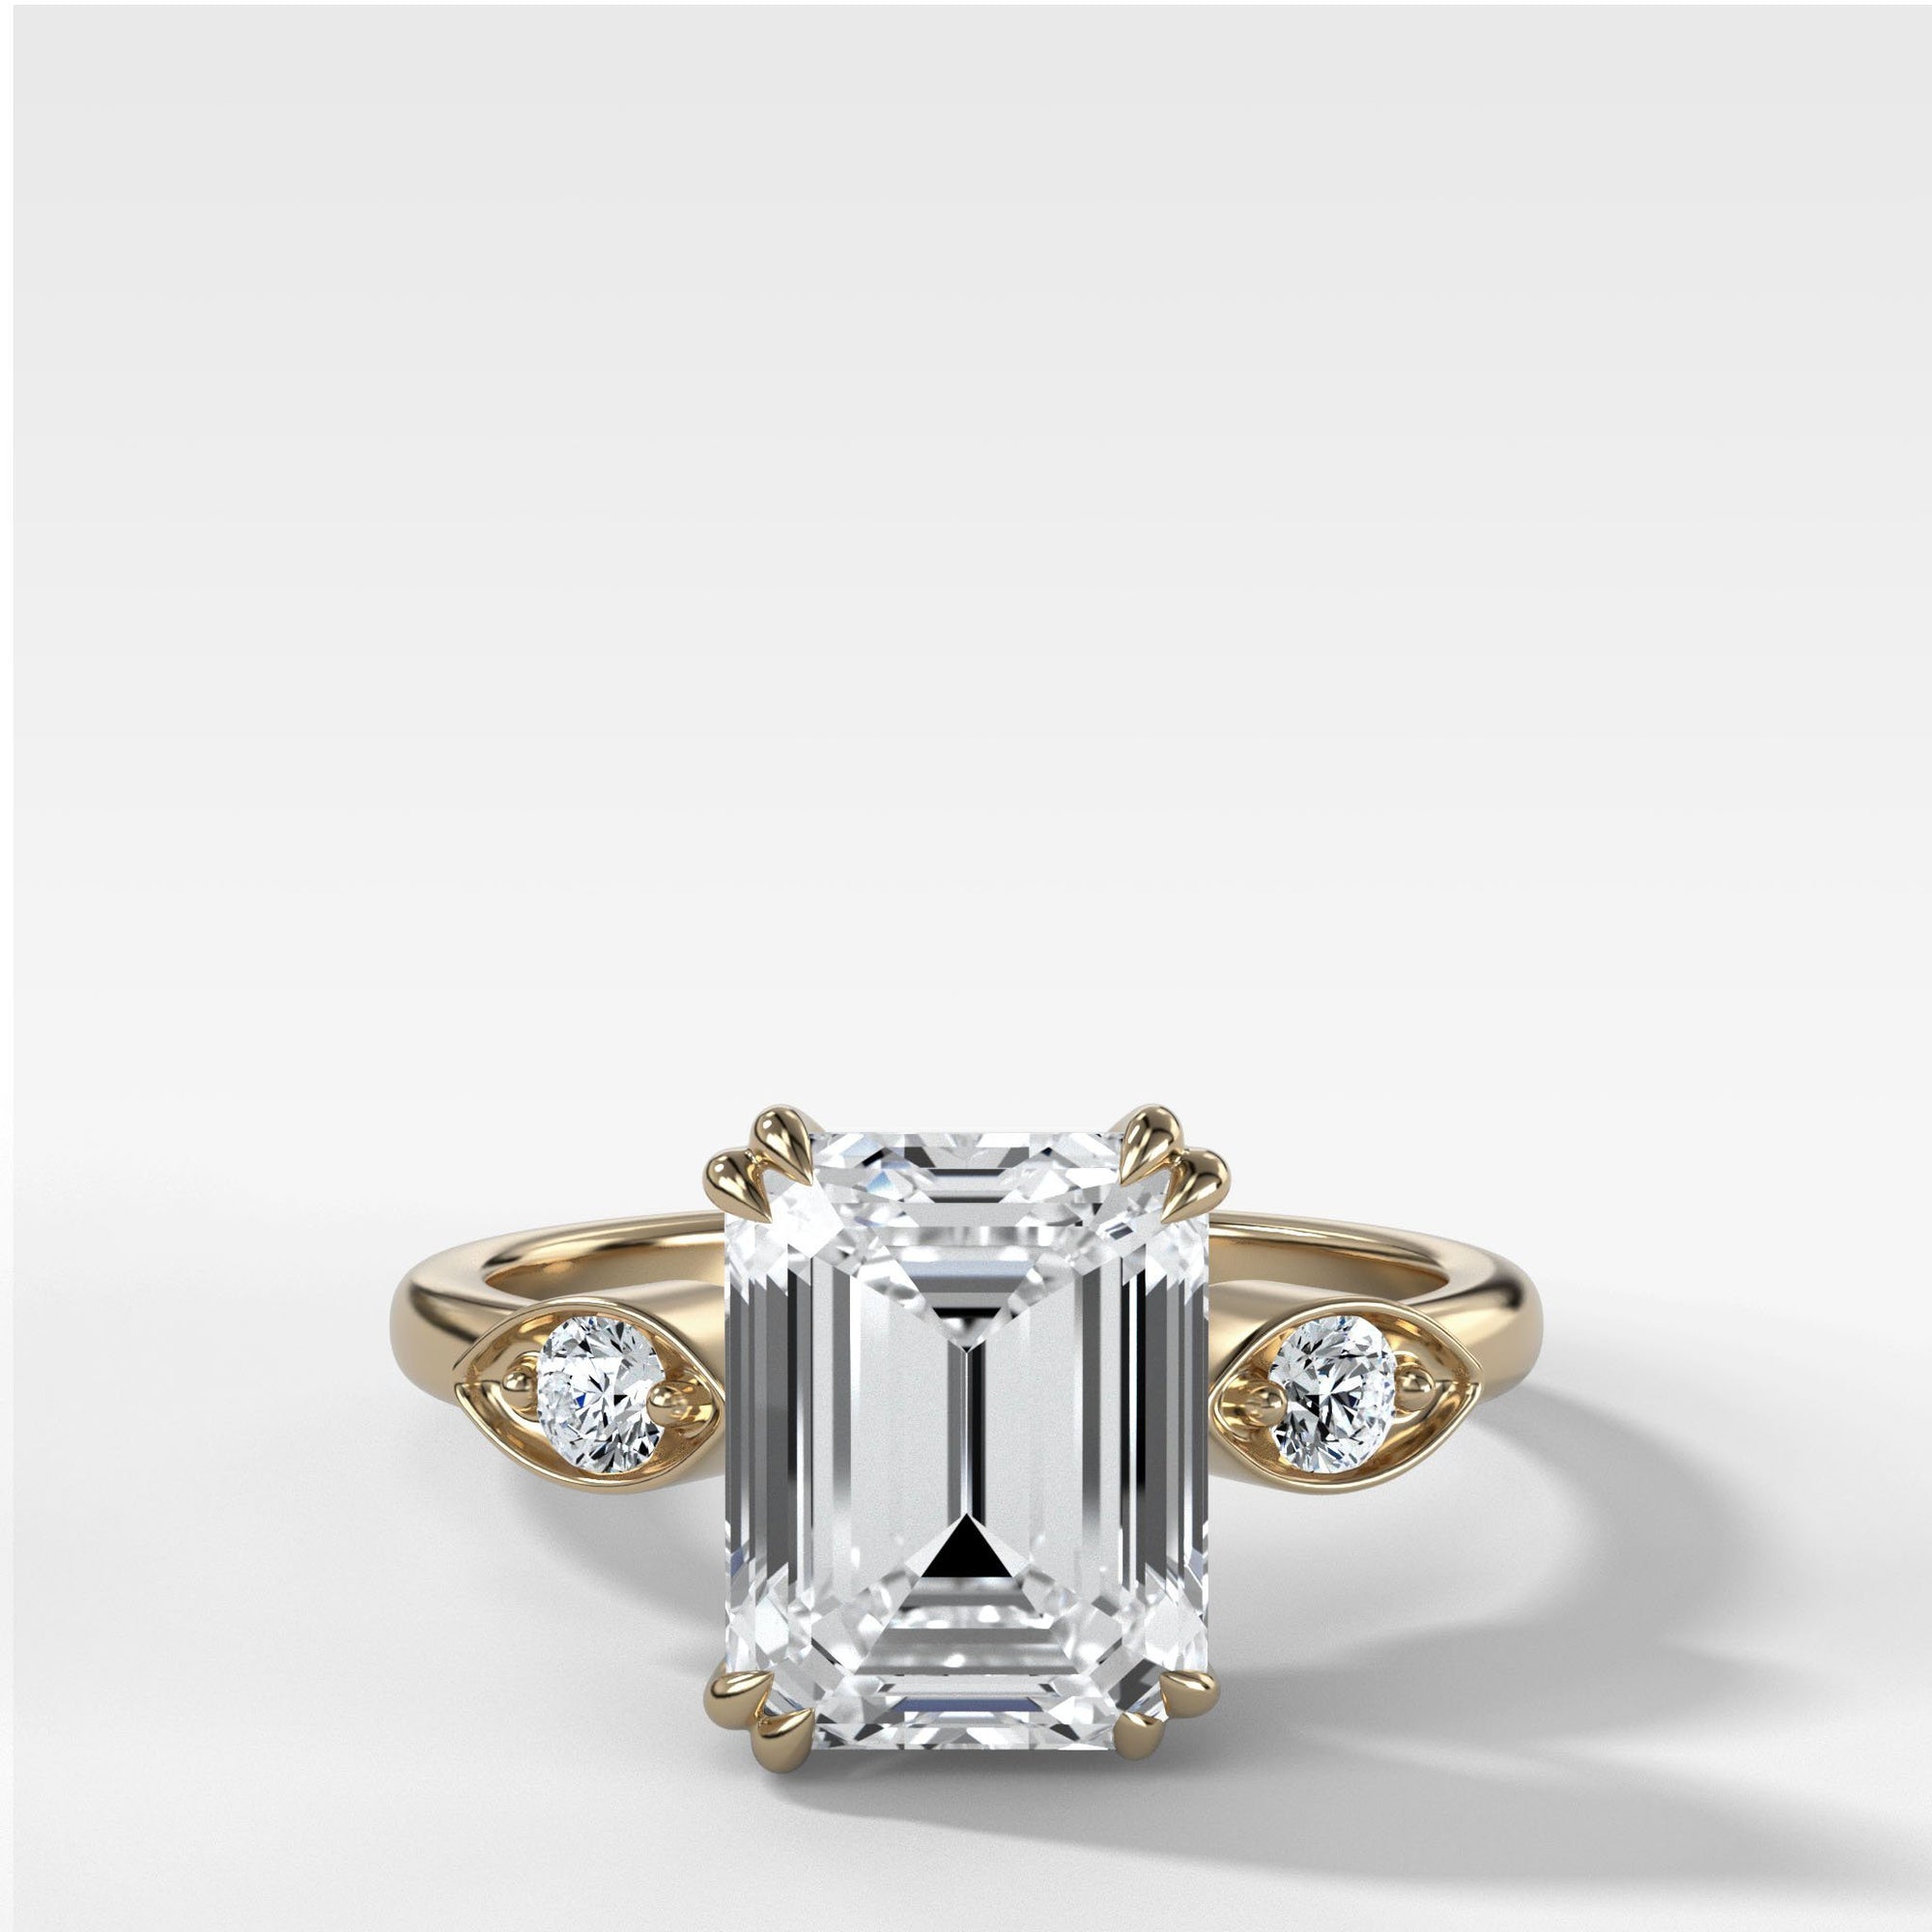 Vintage Ridge Shank Diamond Engagement Ring With Emerald Cut by Good Stone in Yellow Gold